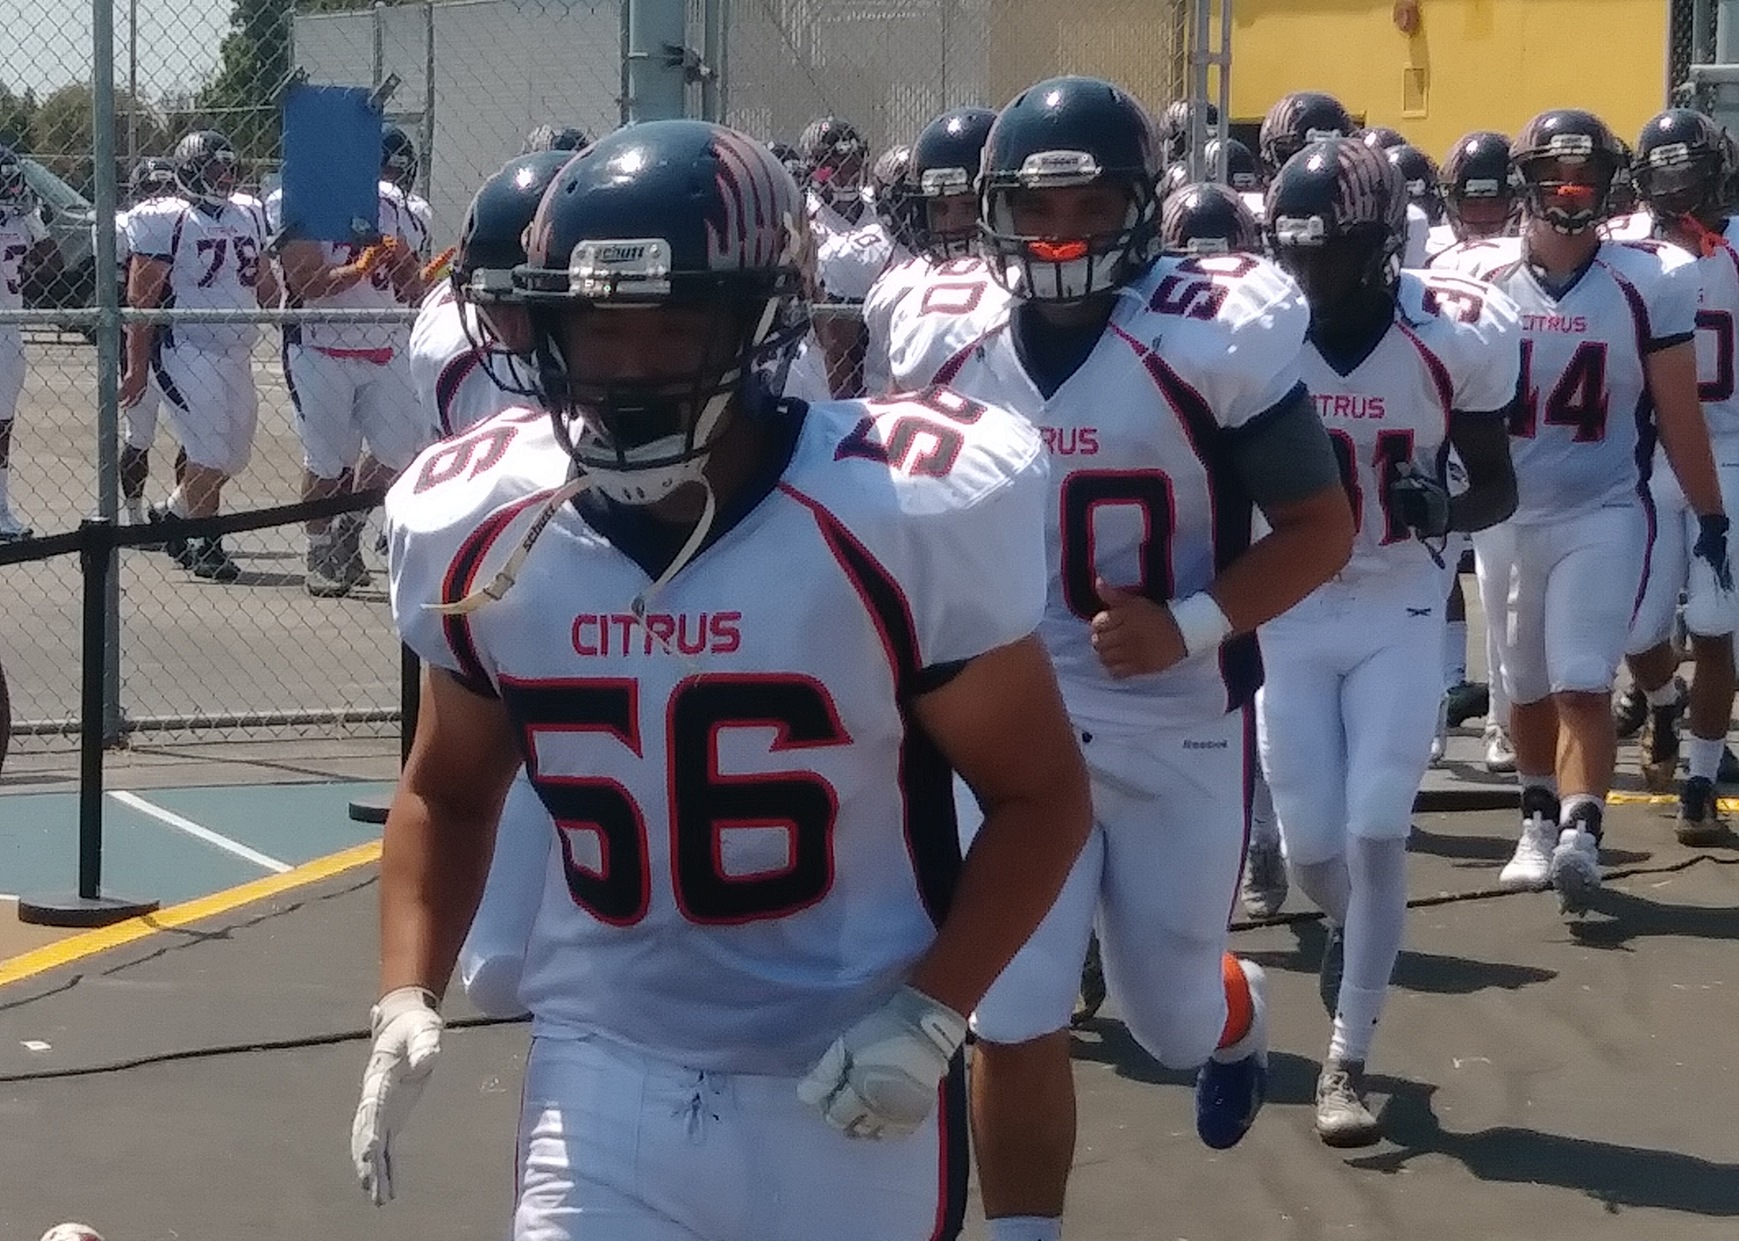 Citrus heads out to the field before Saturday's big win over West LA. Image credit: Jeremy Meyer